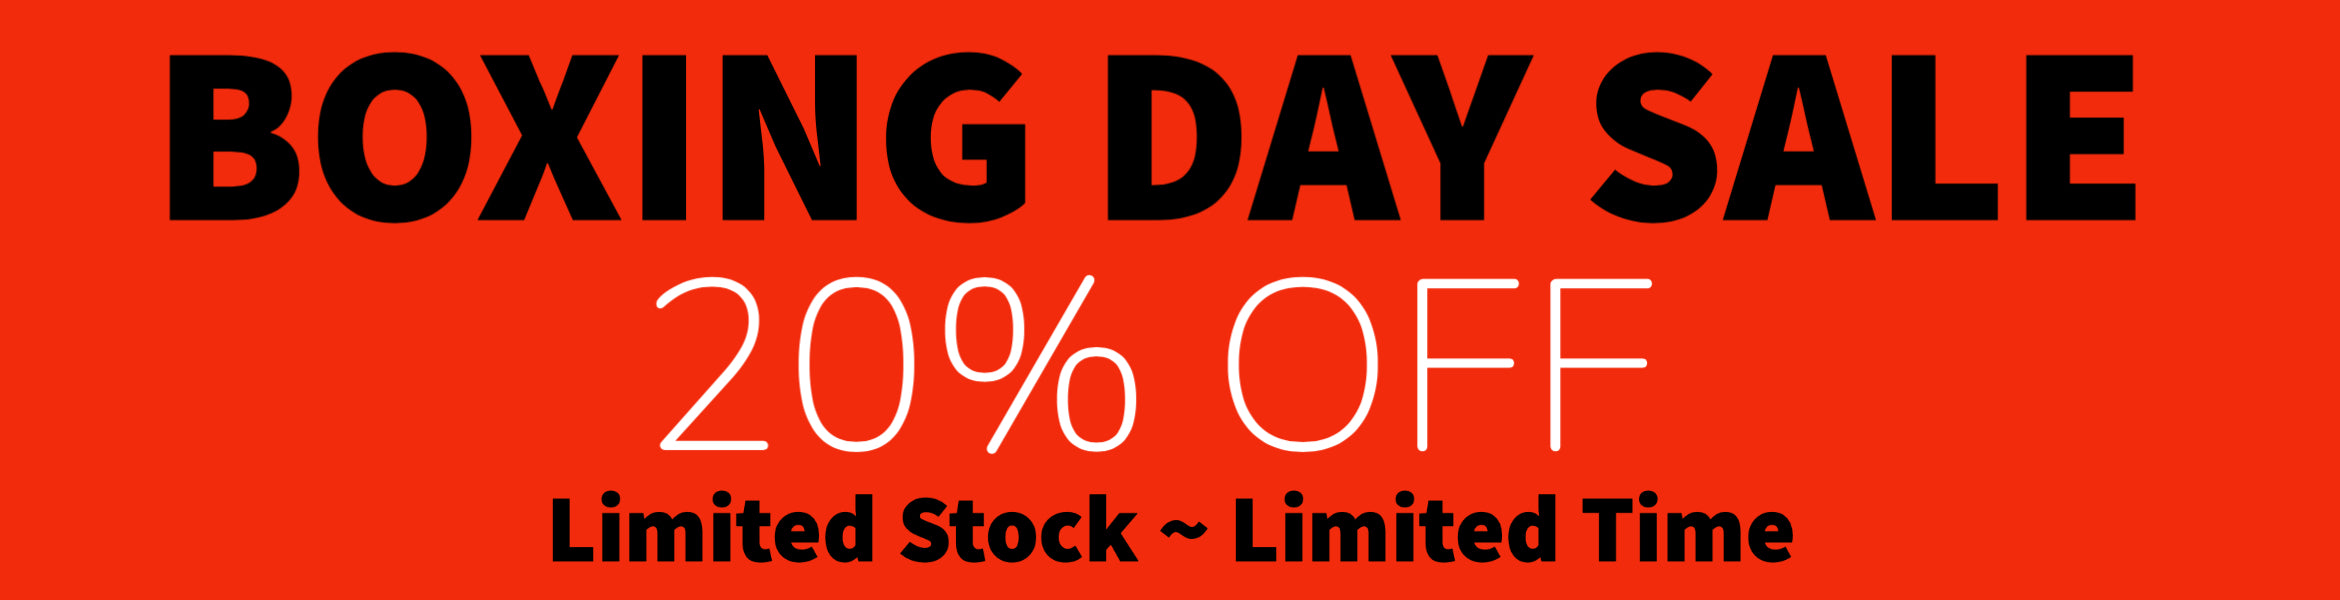 BOXING DAY SALE JEWELLERY & WATCHES | LIMITED TIME LIMITED STOCK